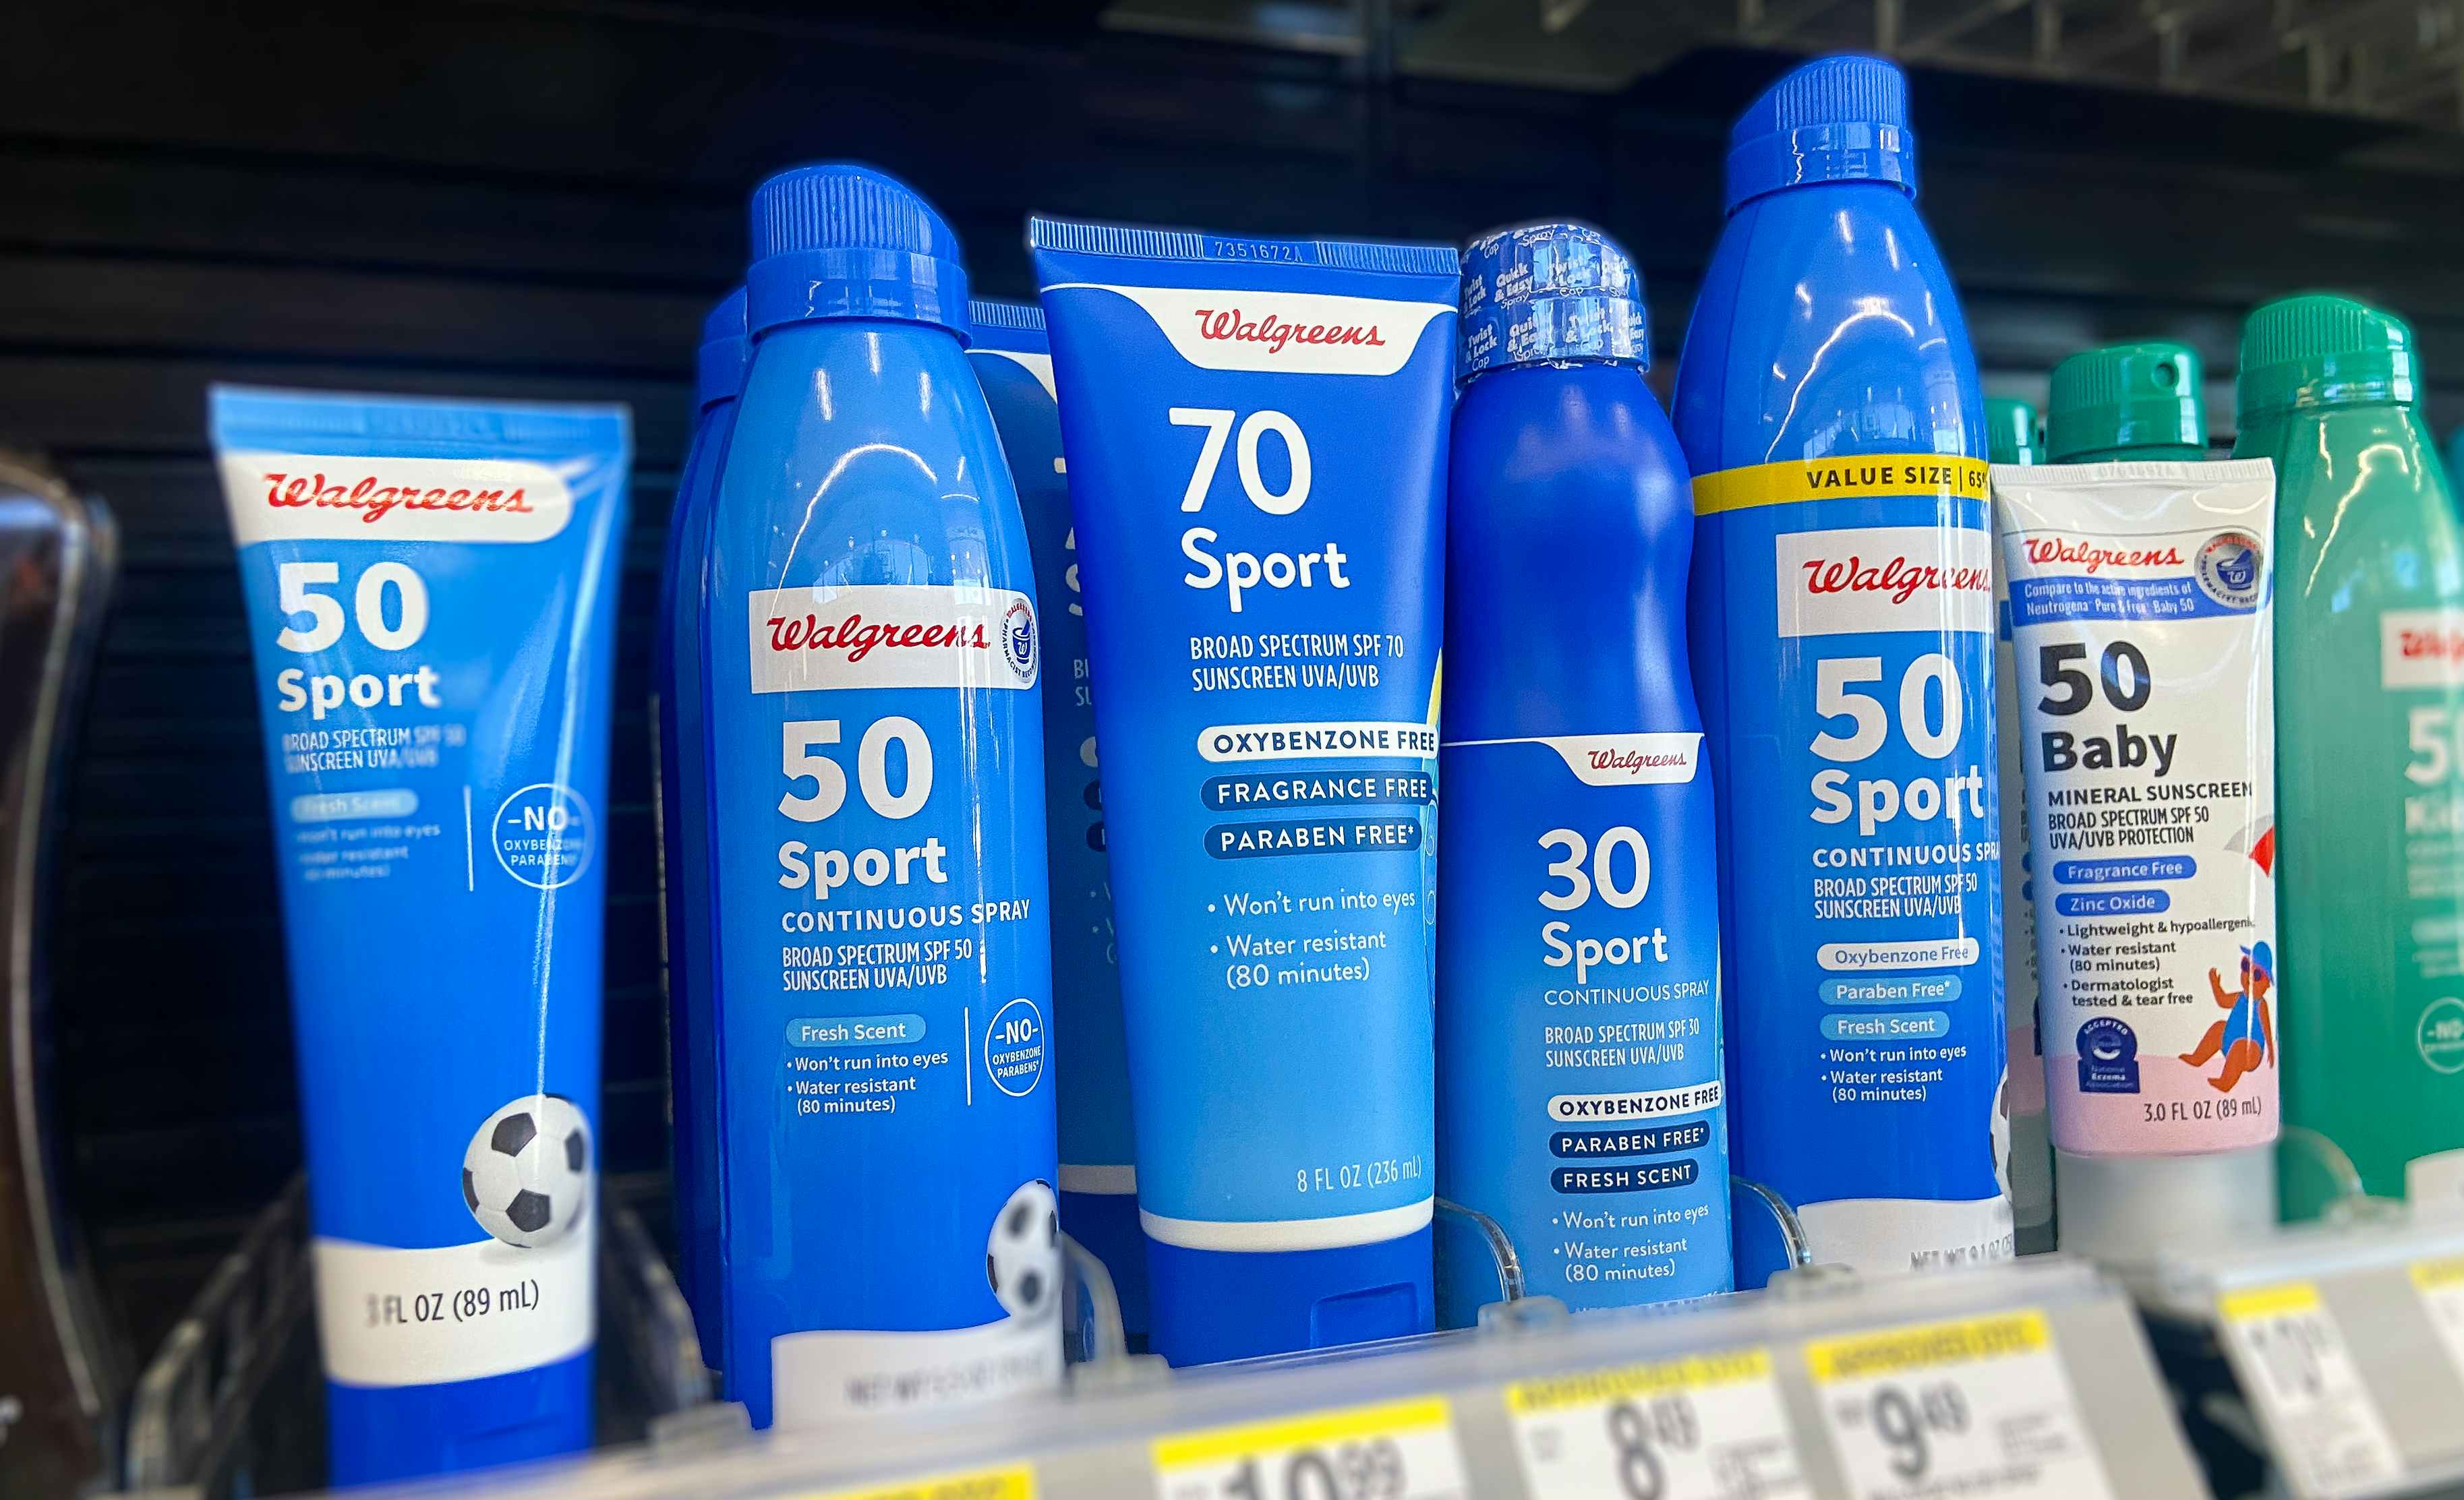 Get Sunscreen at Walgreens for $1.34 Each (Online Only)